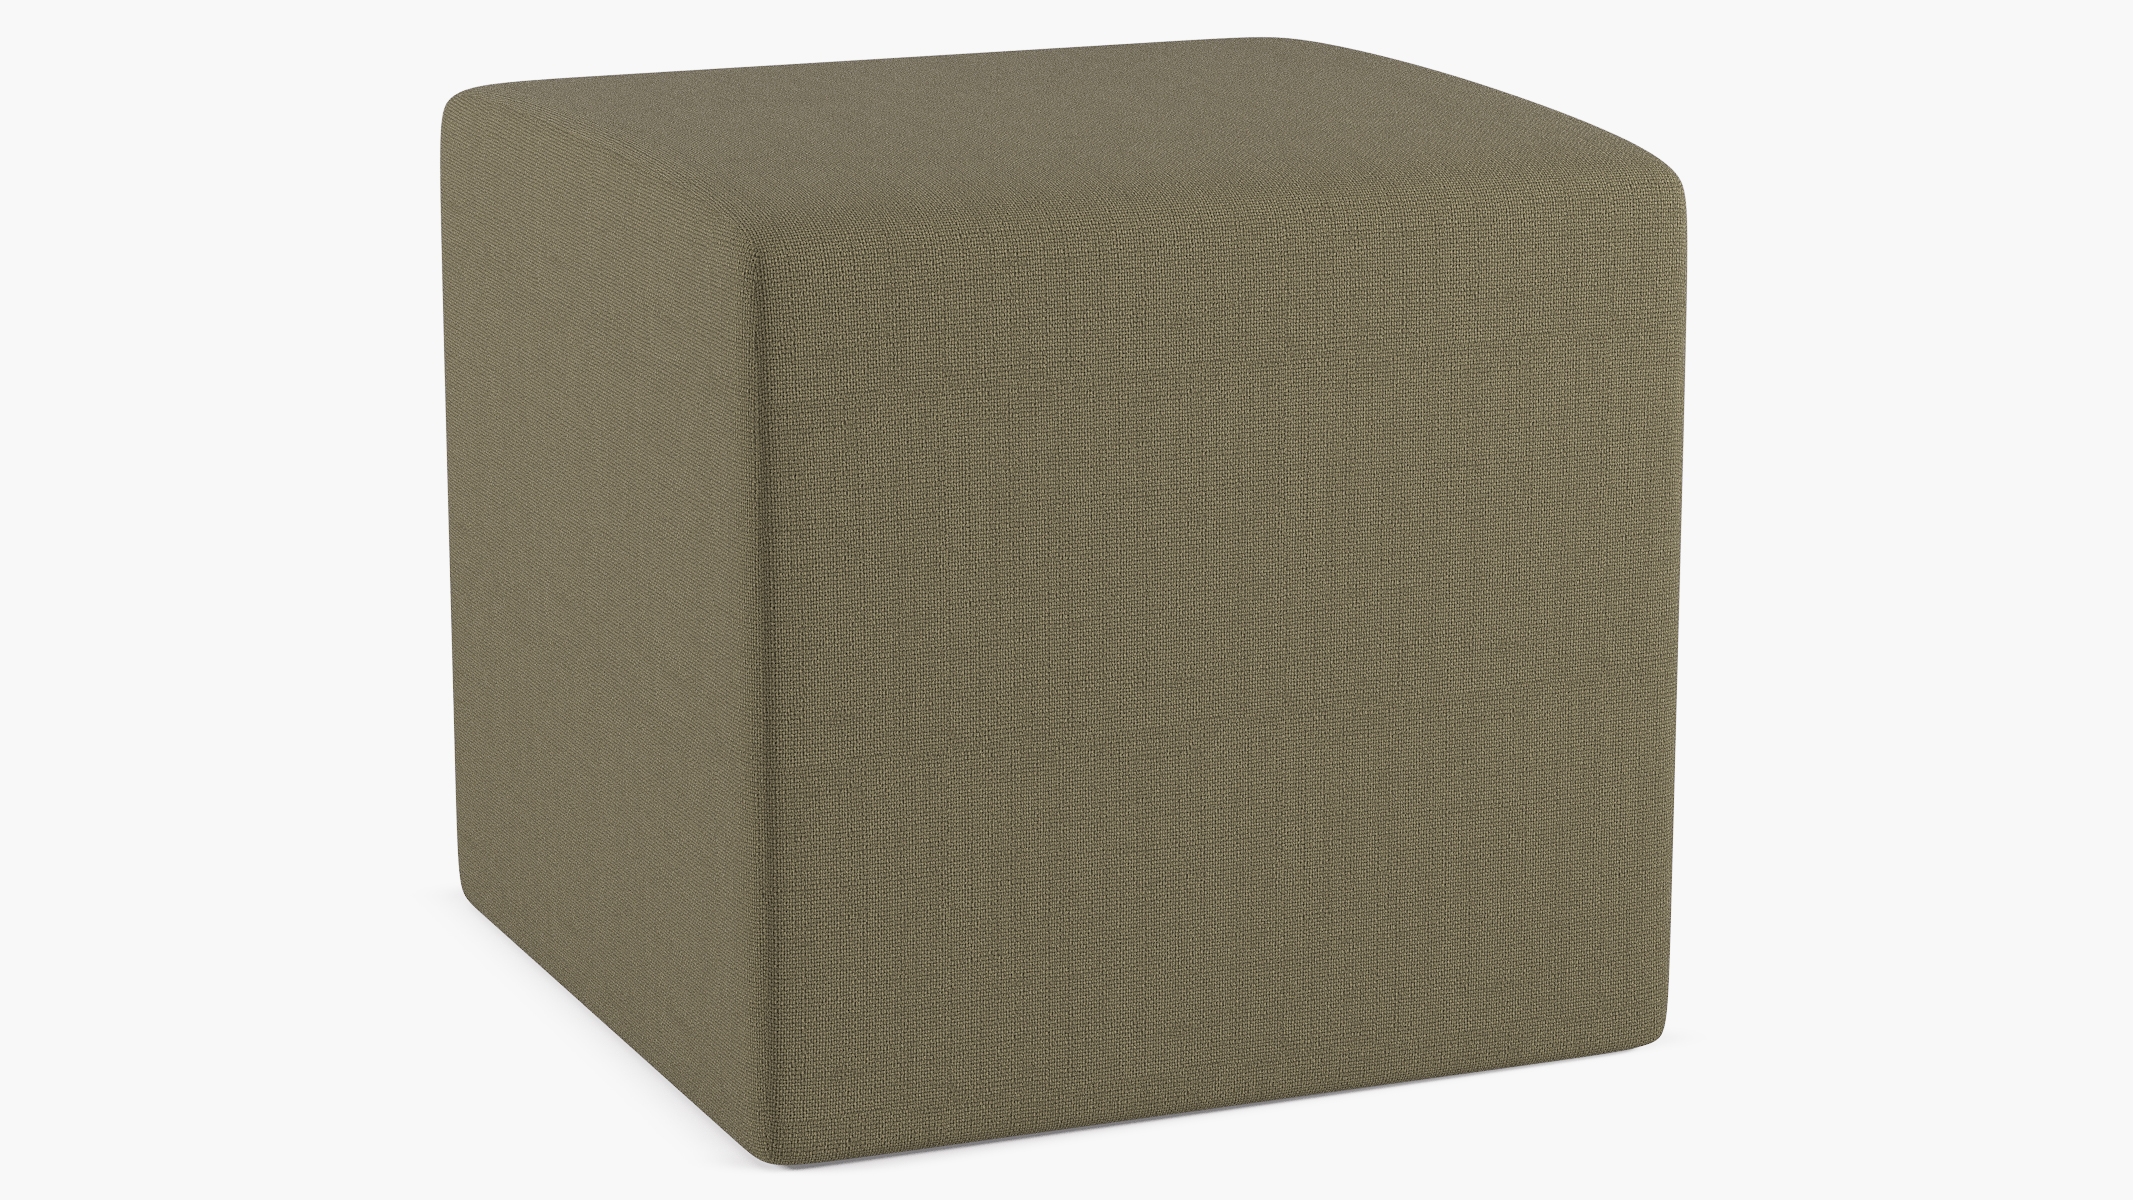 Cube Ottoman, Olive Everyday Linen - Image 1